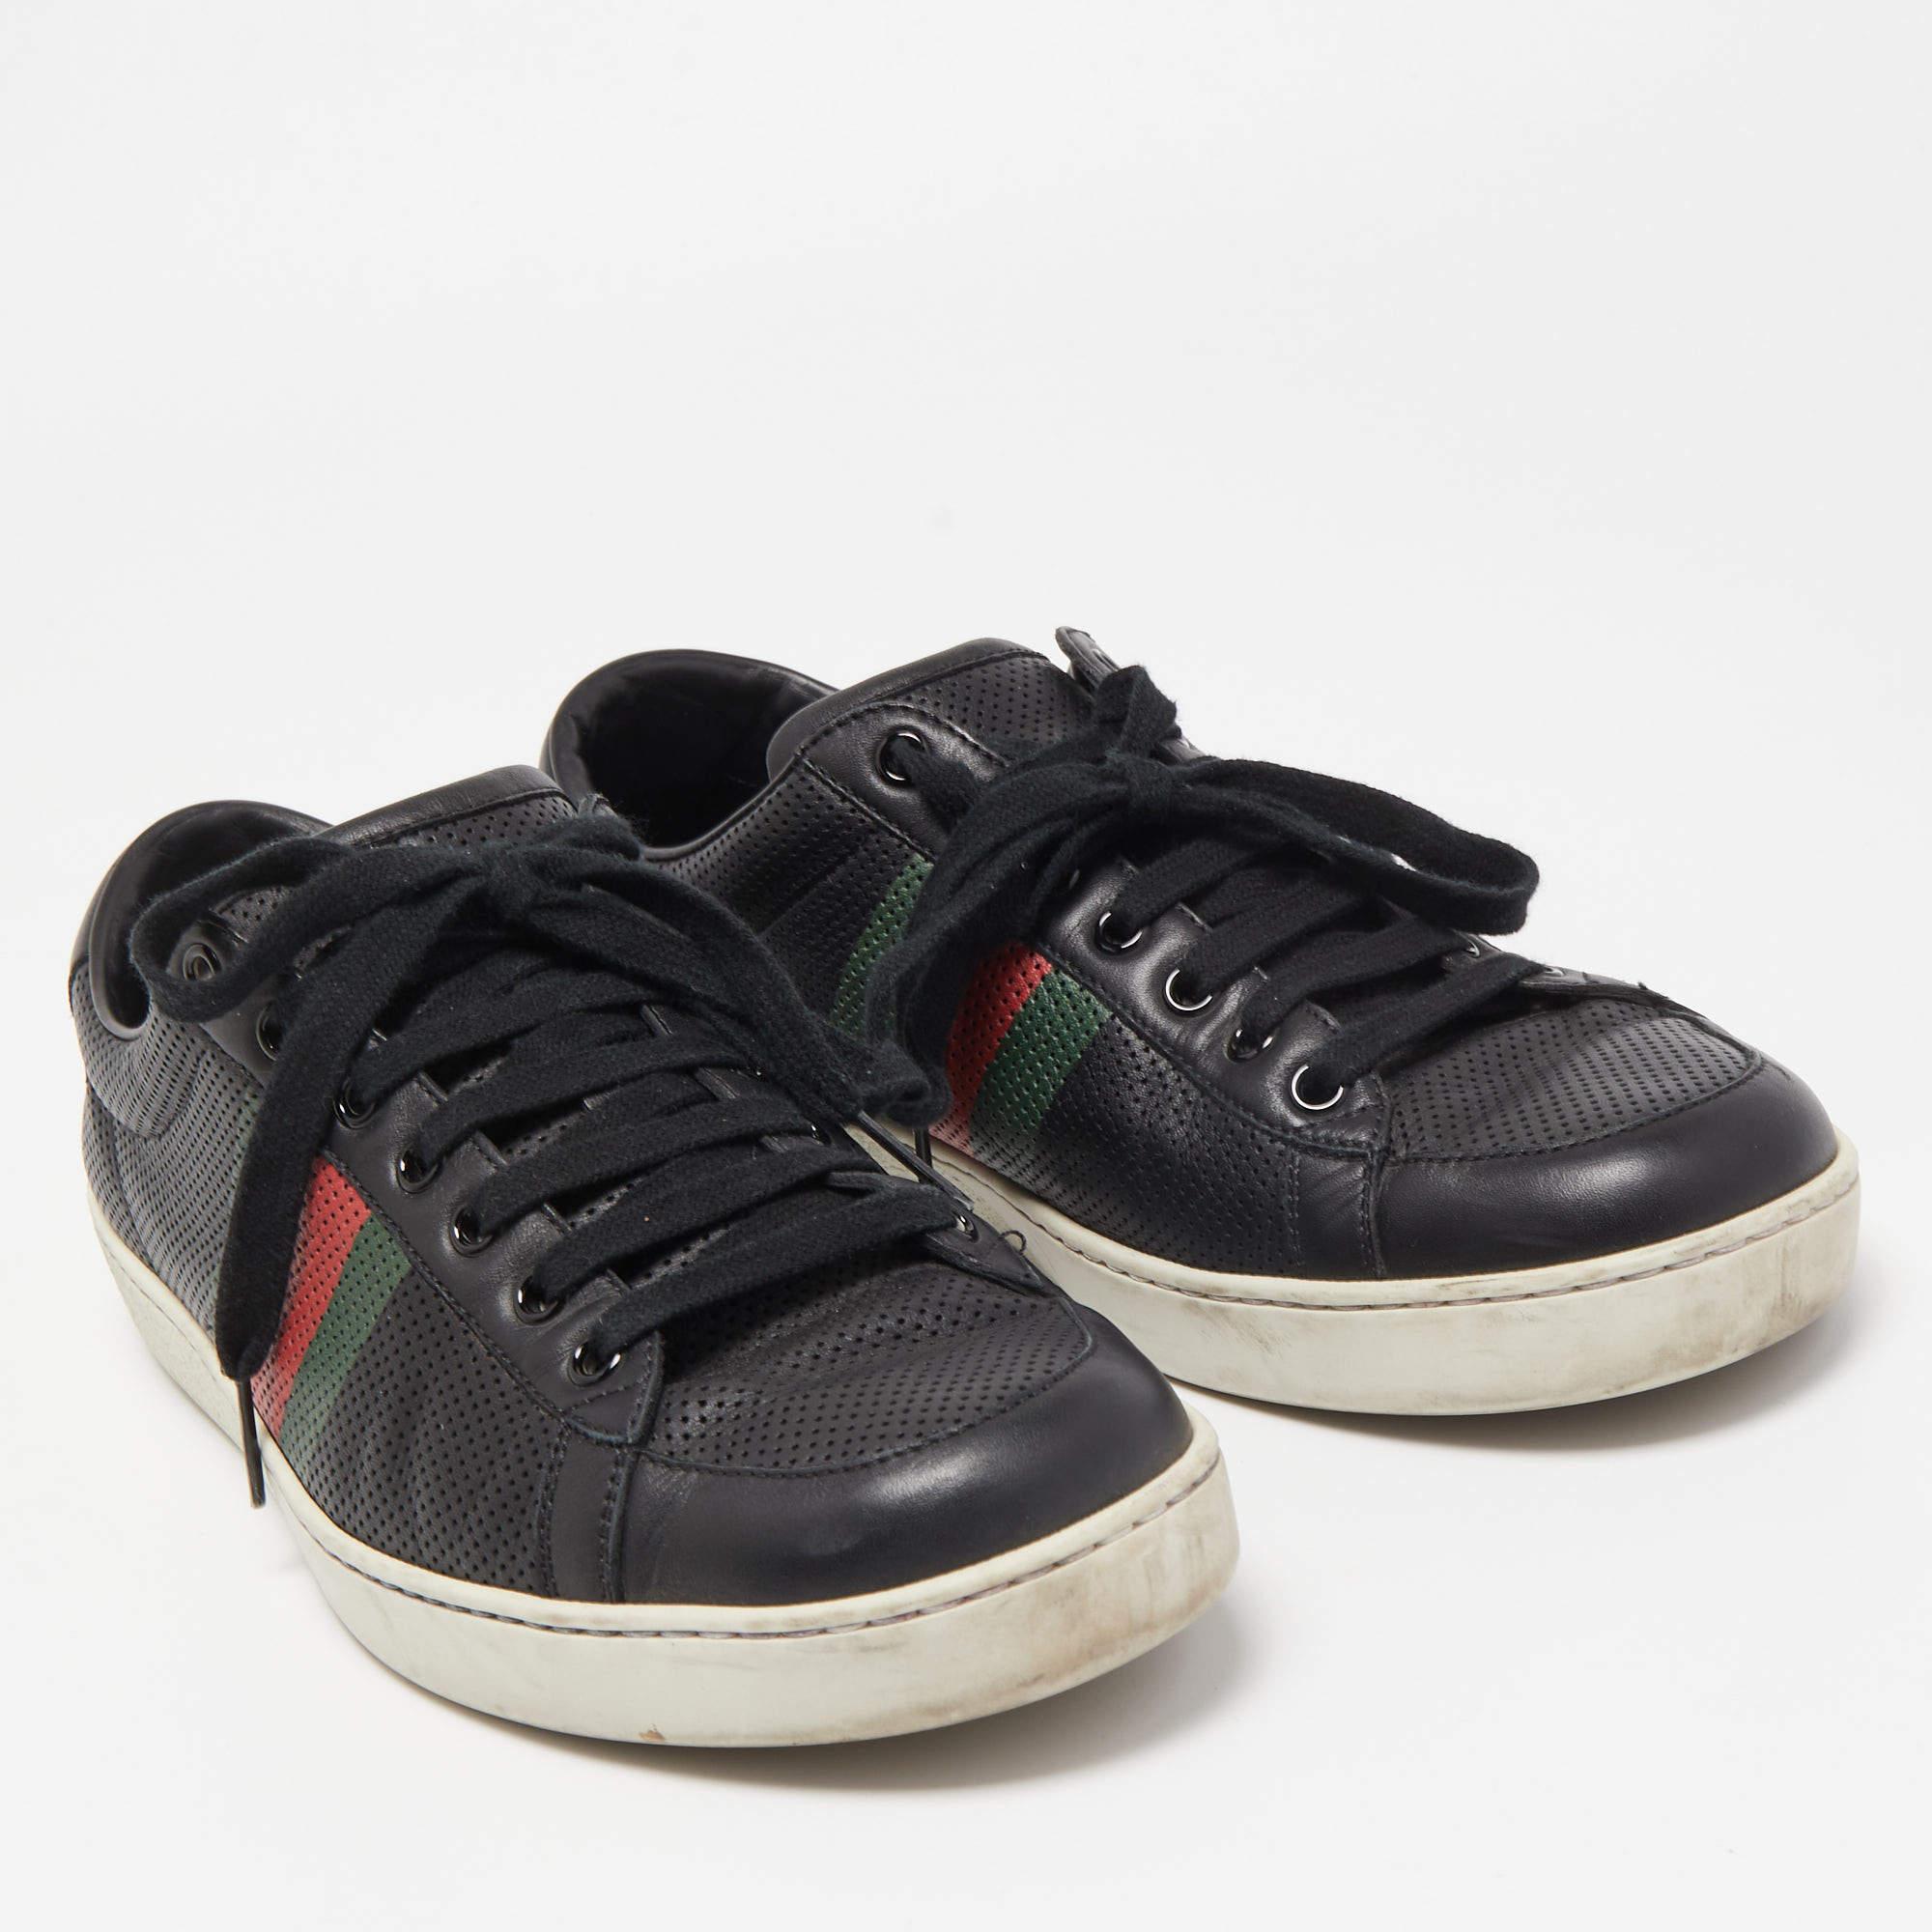 Elevate your footwear game with these Gucci sneakers. Combining high-end aesthetics and unmatched comfort, these sneakers are a symbol of modern luxury and impeccable taste.

